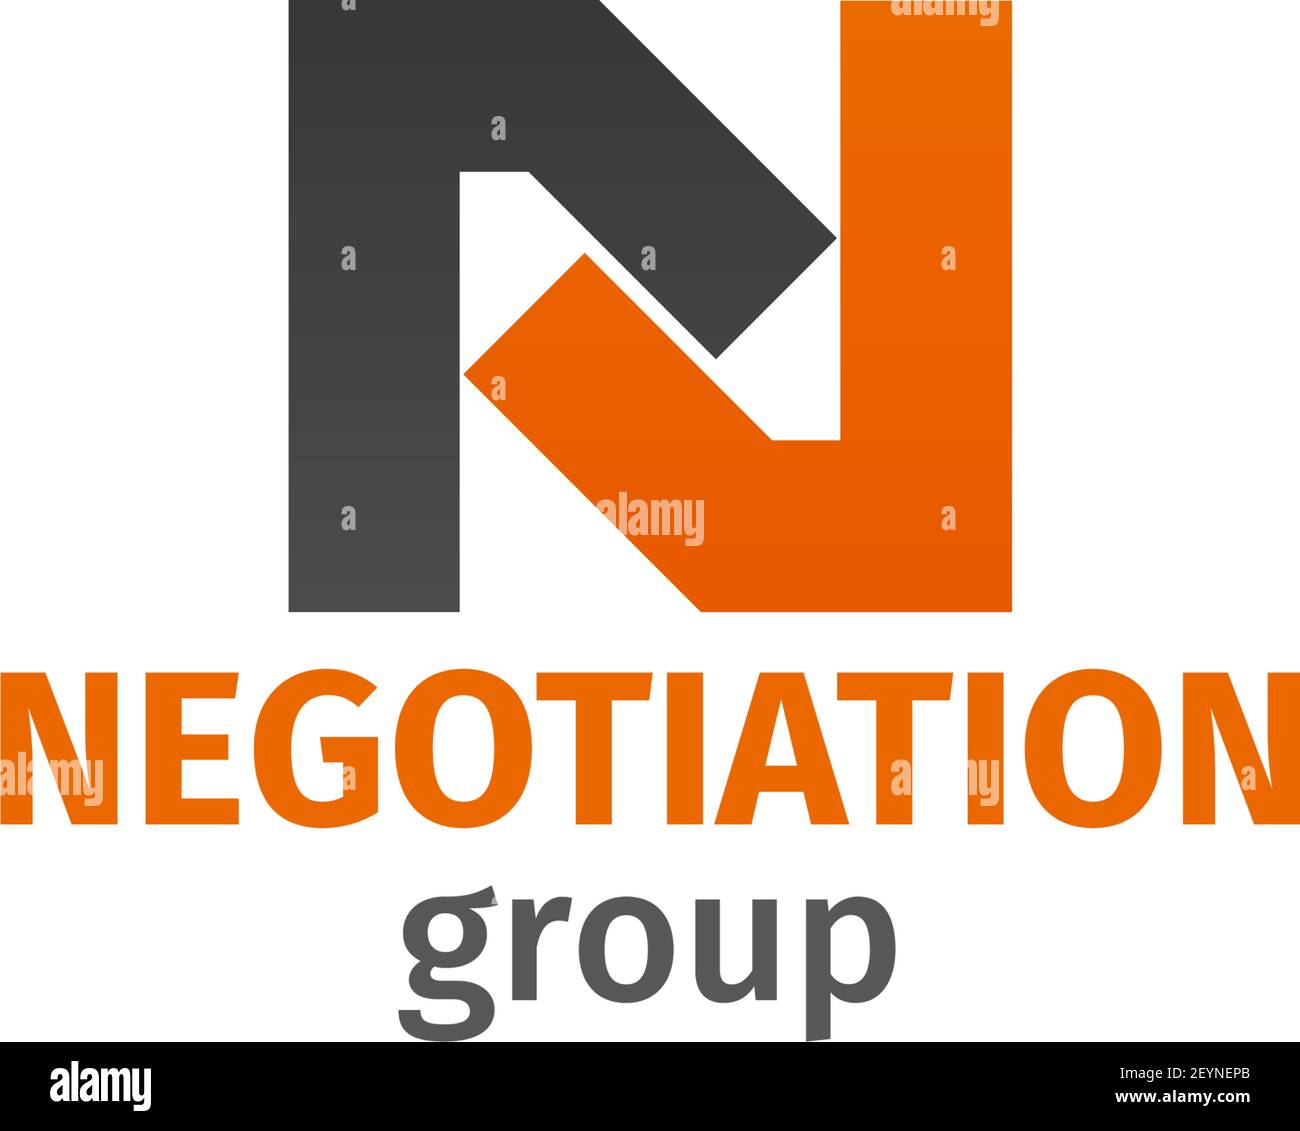 Negotiation group vector icon isolated on a white background. Concept of teamwork organization or group of business people or corporate management. Cr Stock Vector